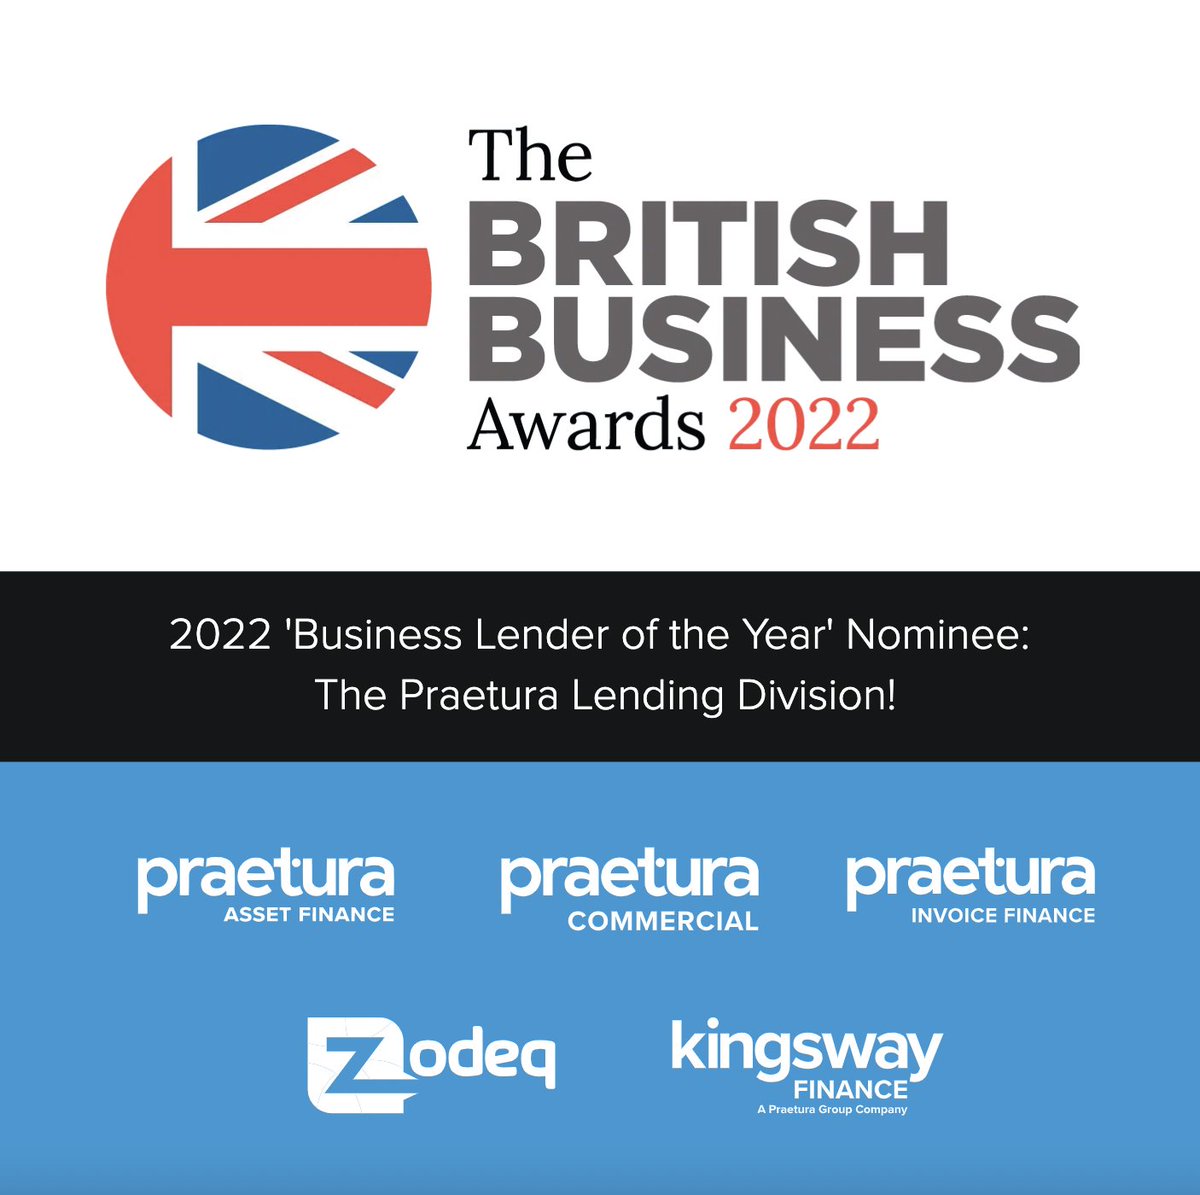 🎉 Pleased and proud to share that the Praetura Lending Division has been nominated for Business Lender of the Year at the 2022 British Business Awards !

britishsmallbusinessawards.co.uk/2022-shortlist/

#BBA #Smallbusinessawards #Britishbusinessawards